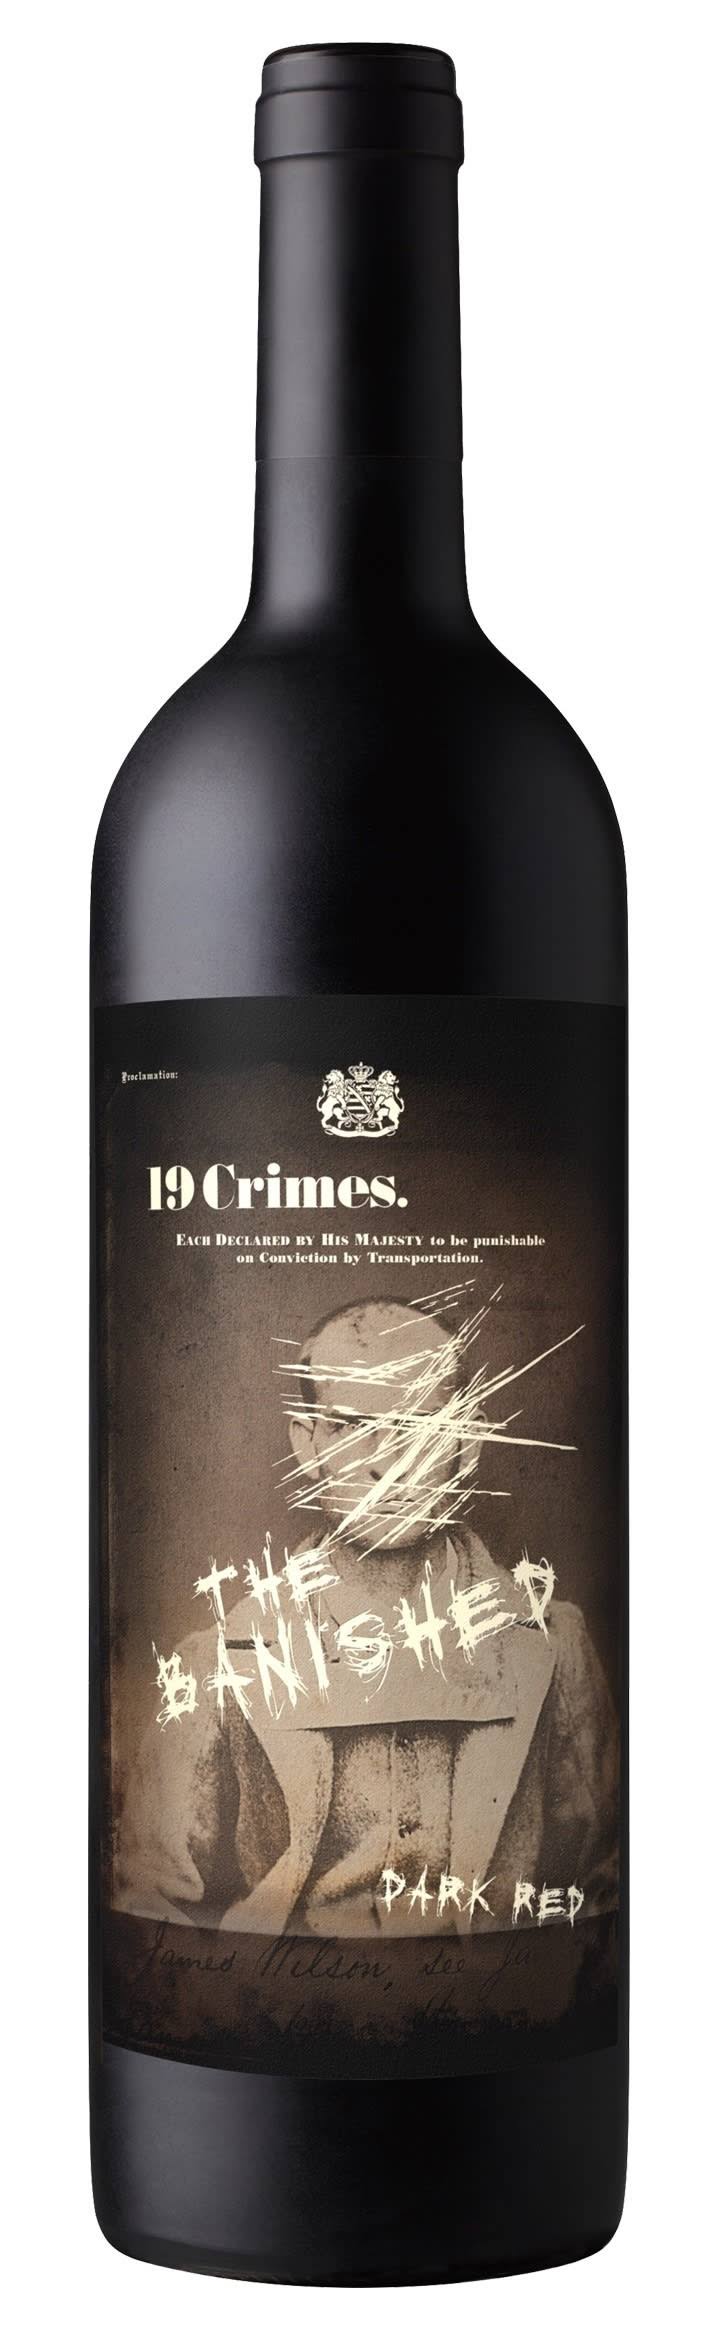 19 Crimes Dark Red, The Banished, 2016 - 750 ml